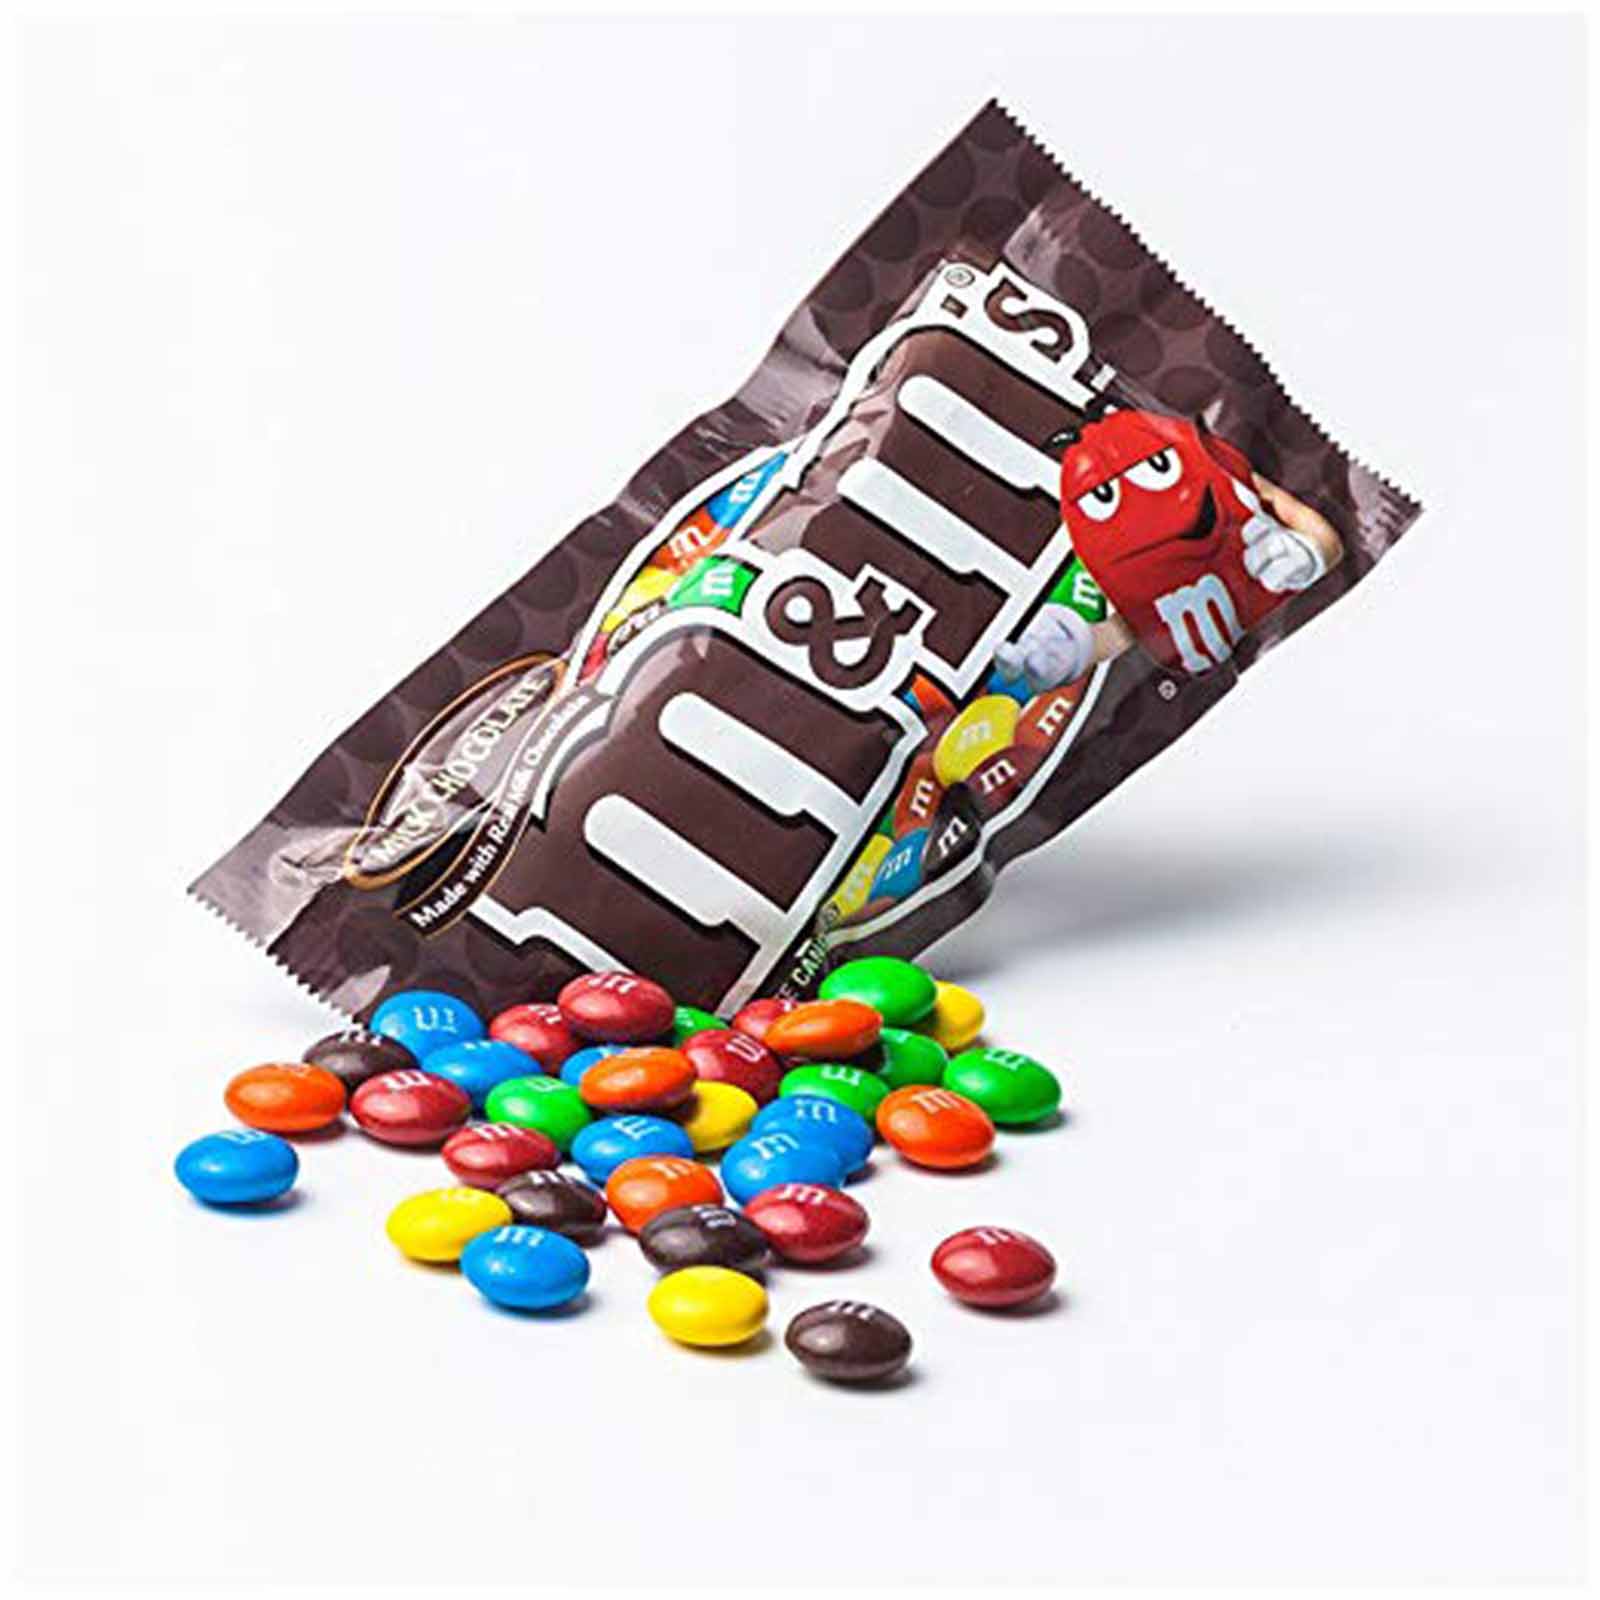 Buy M&M's Chocolate Candy (Pack of 36)